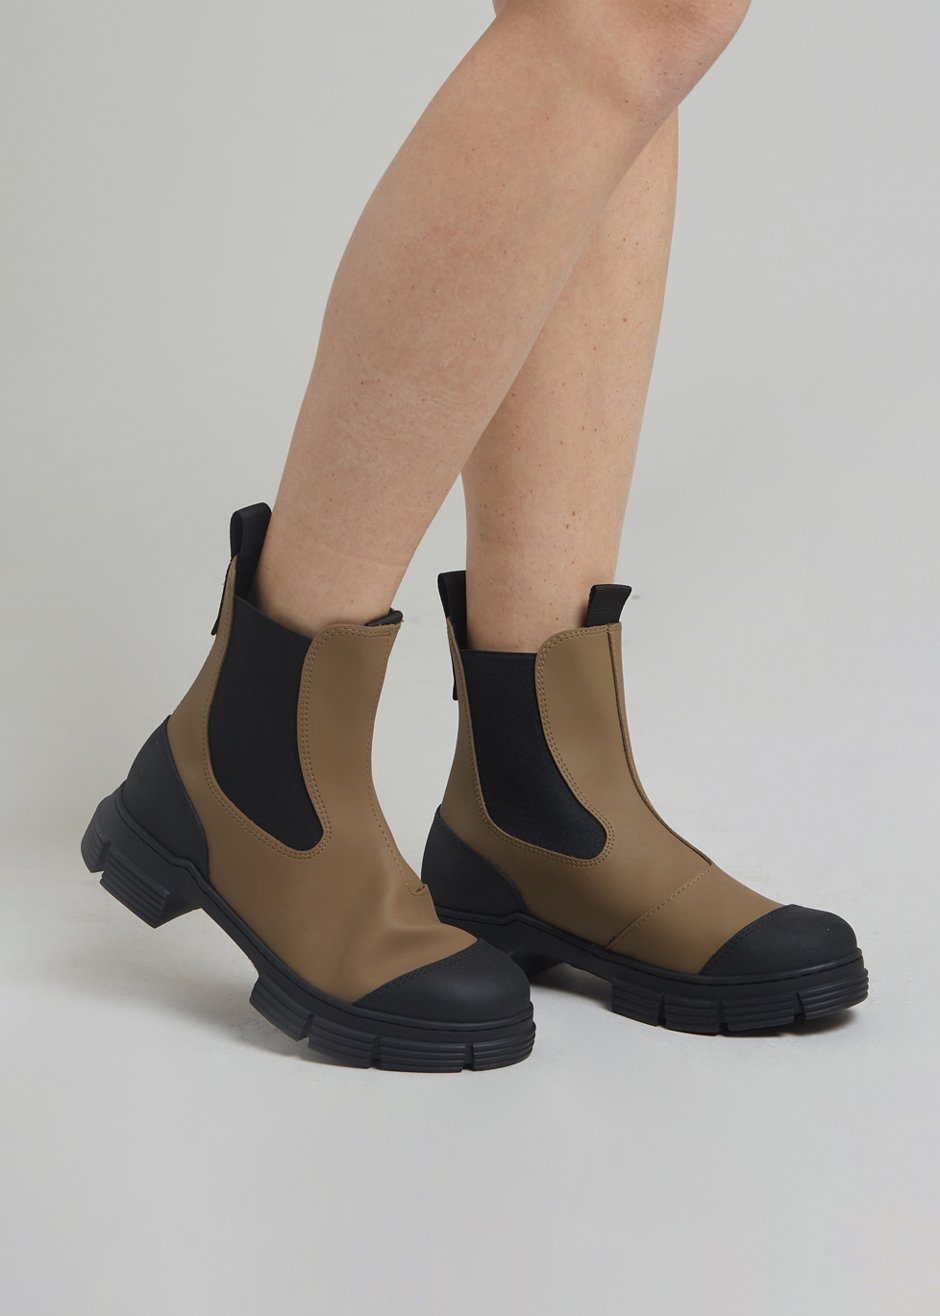 GANNI Recycled Rubber Chelsea Boots - Fossil